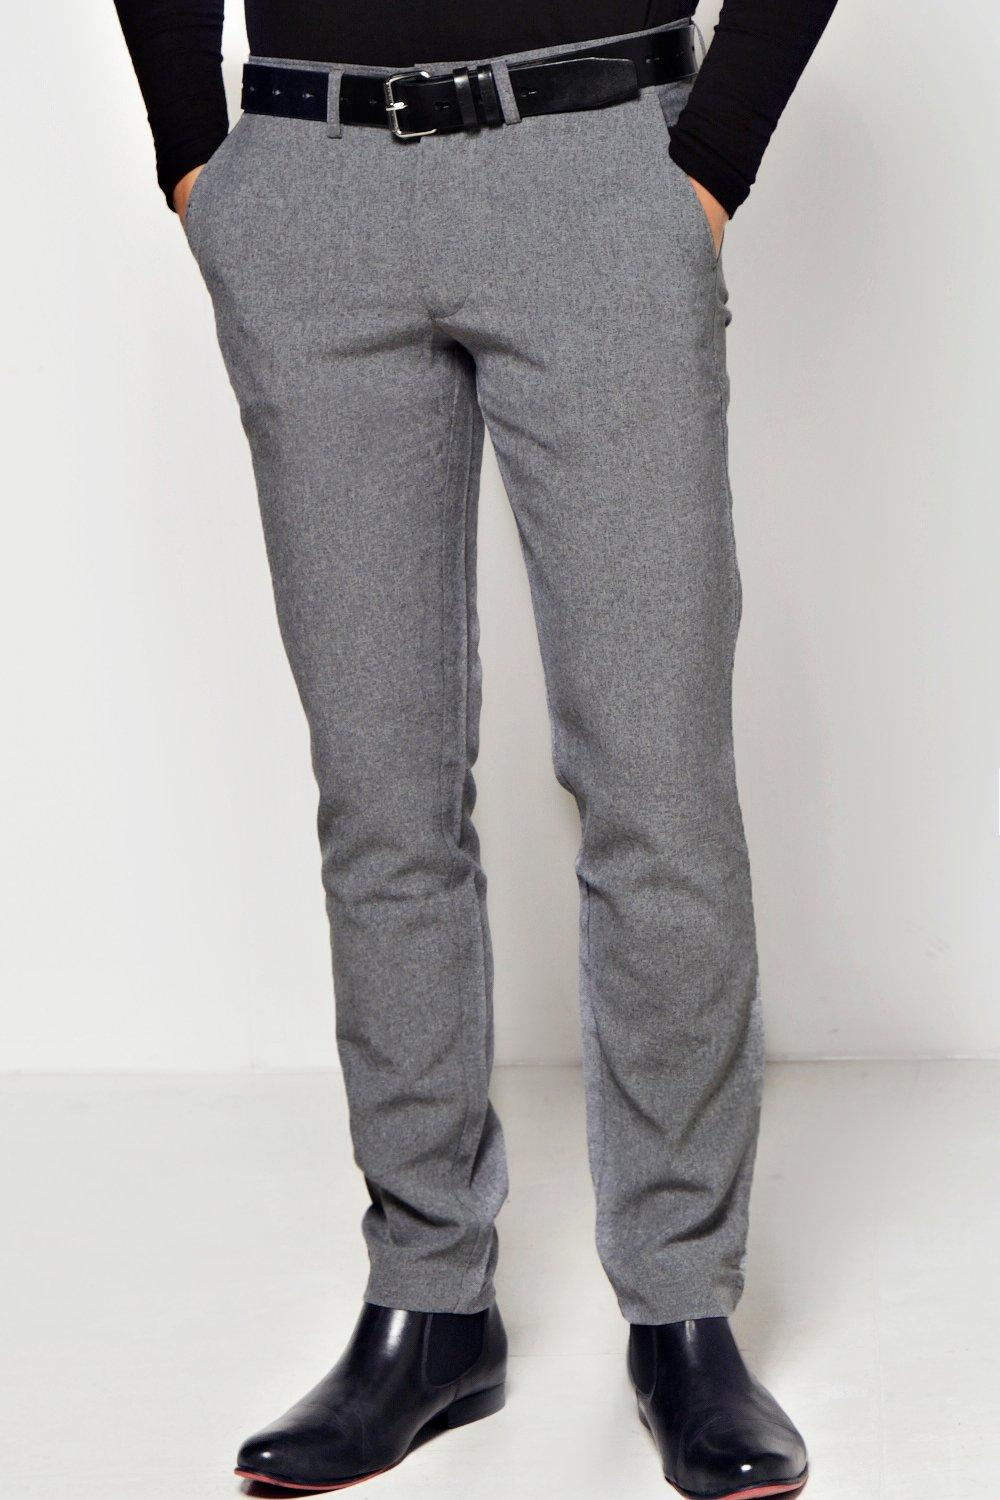 Lyst - Boohoo Smart Trousers in Gray for Men